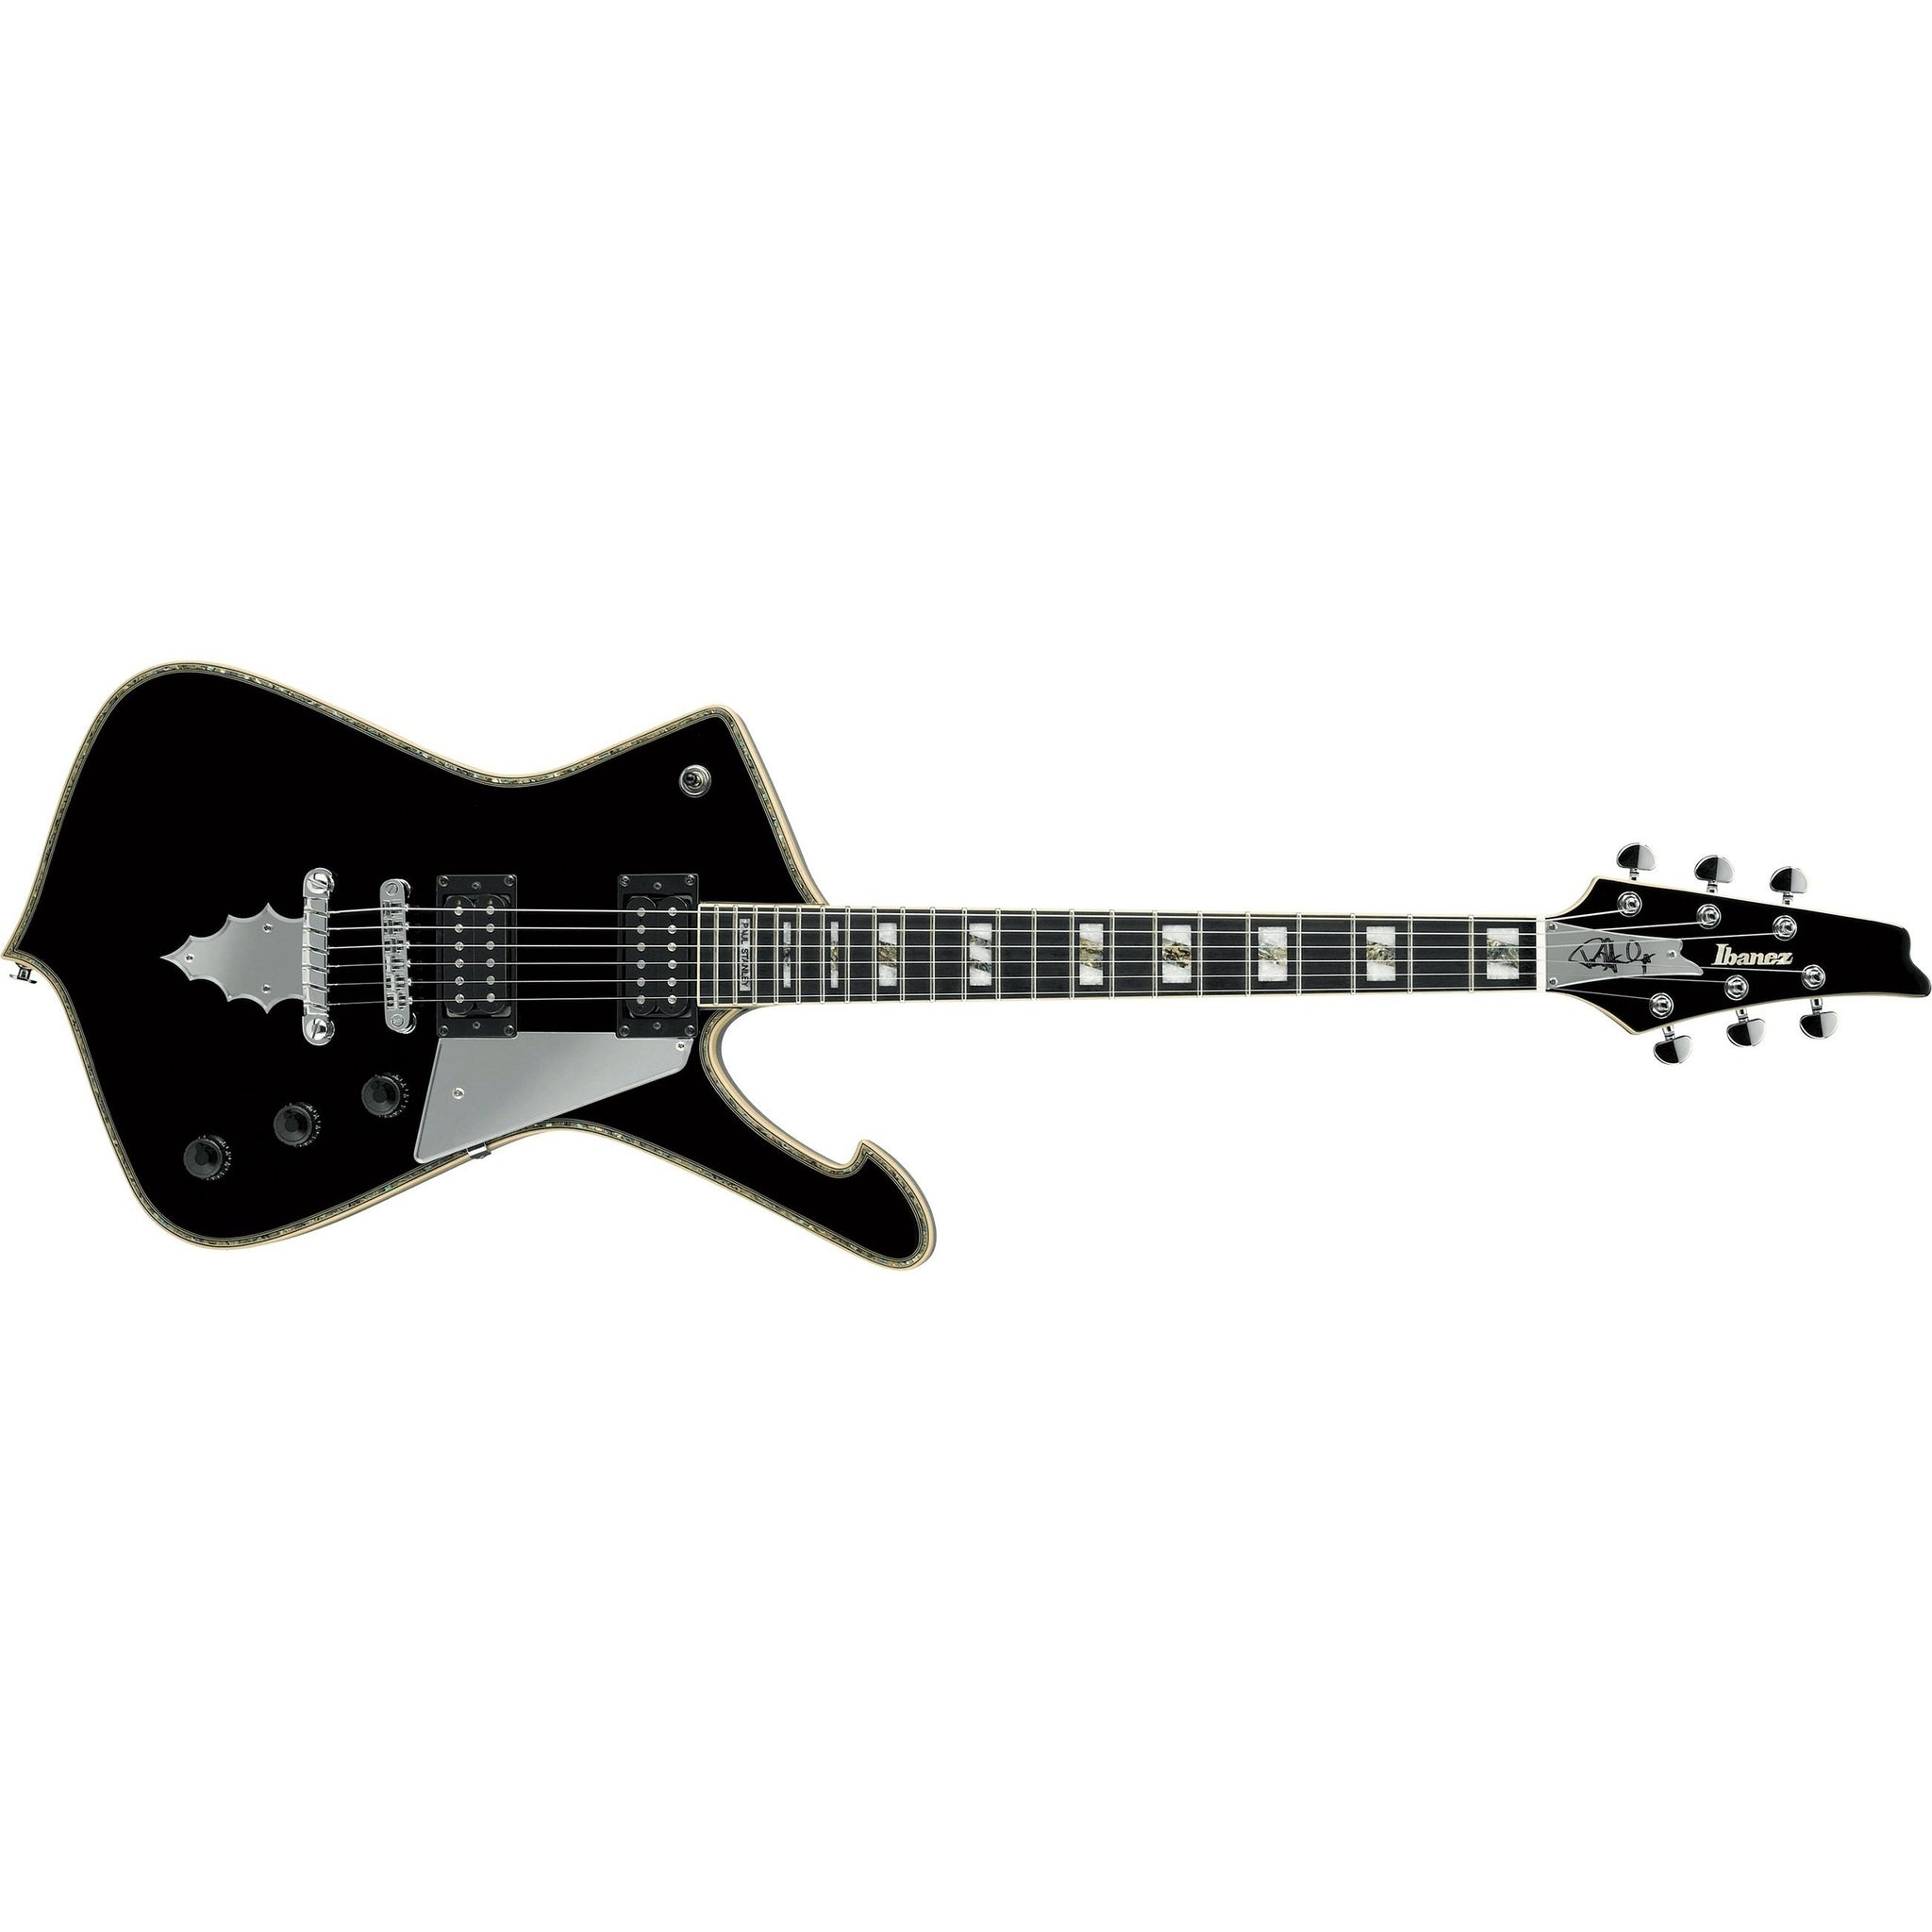 Ibanez PS120-BK Paul Stanley Signature Electric Guitar with Gig Bag-Black-Music World Academy